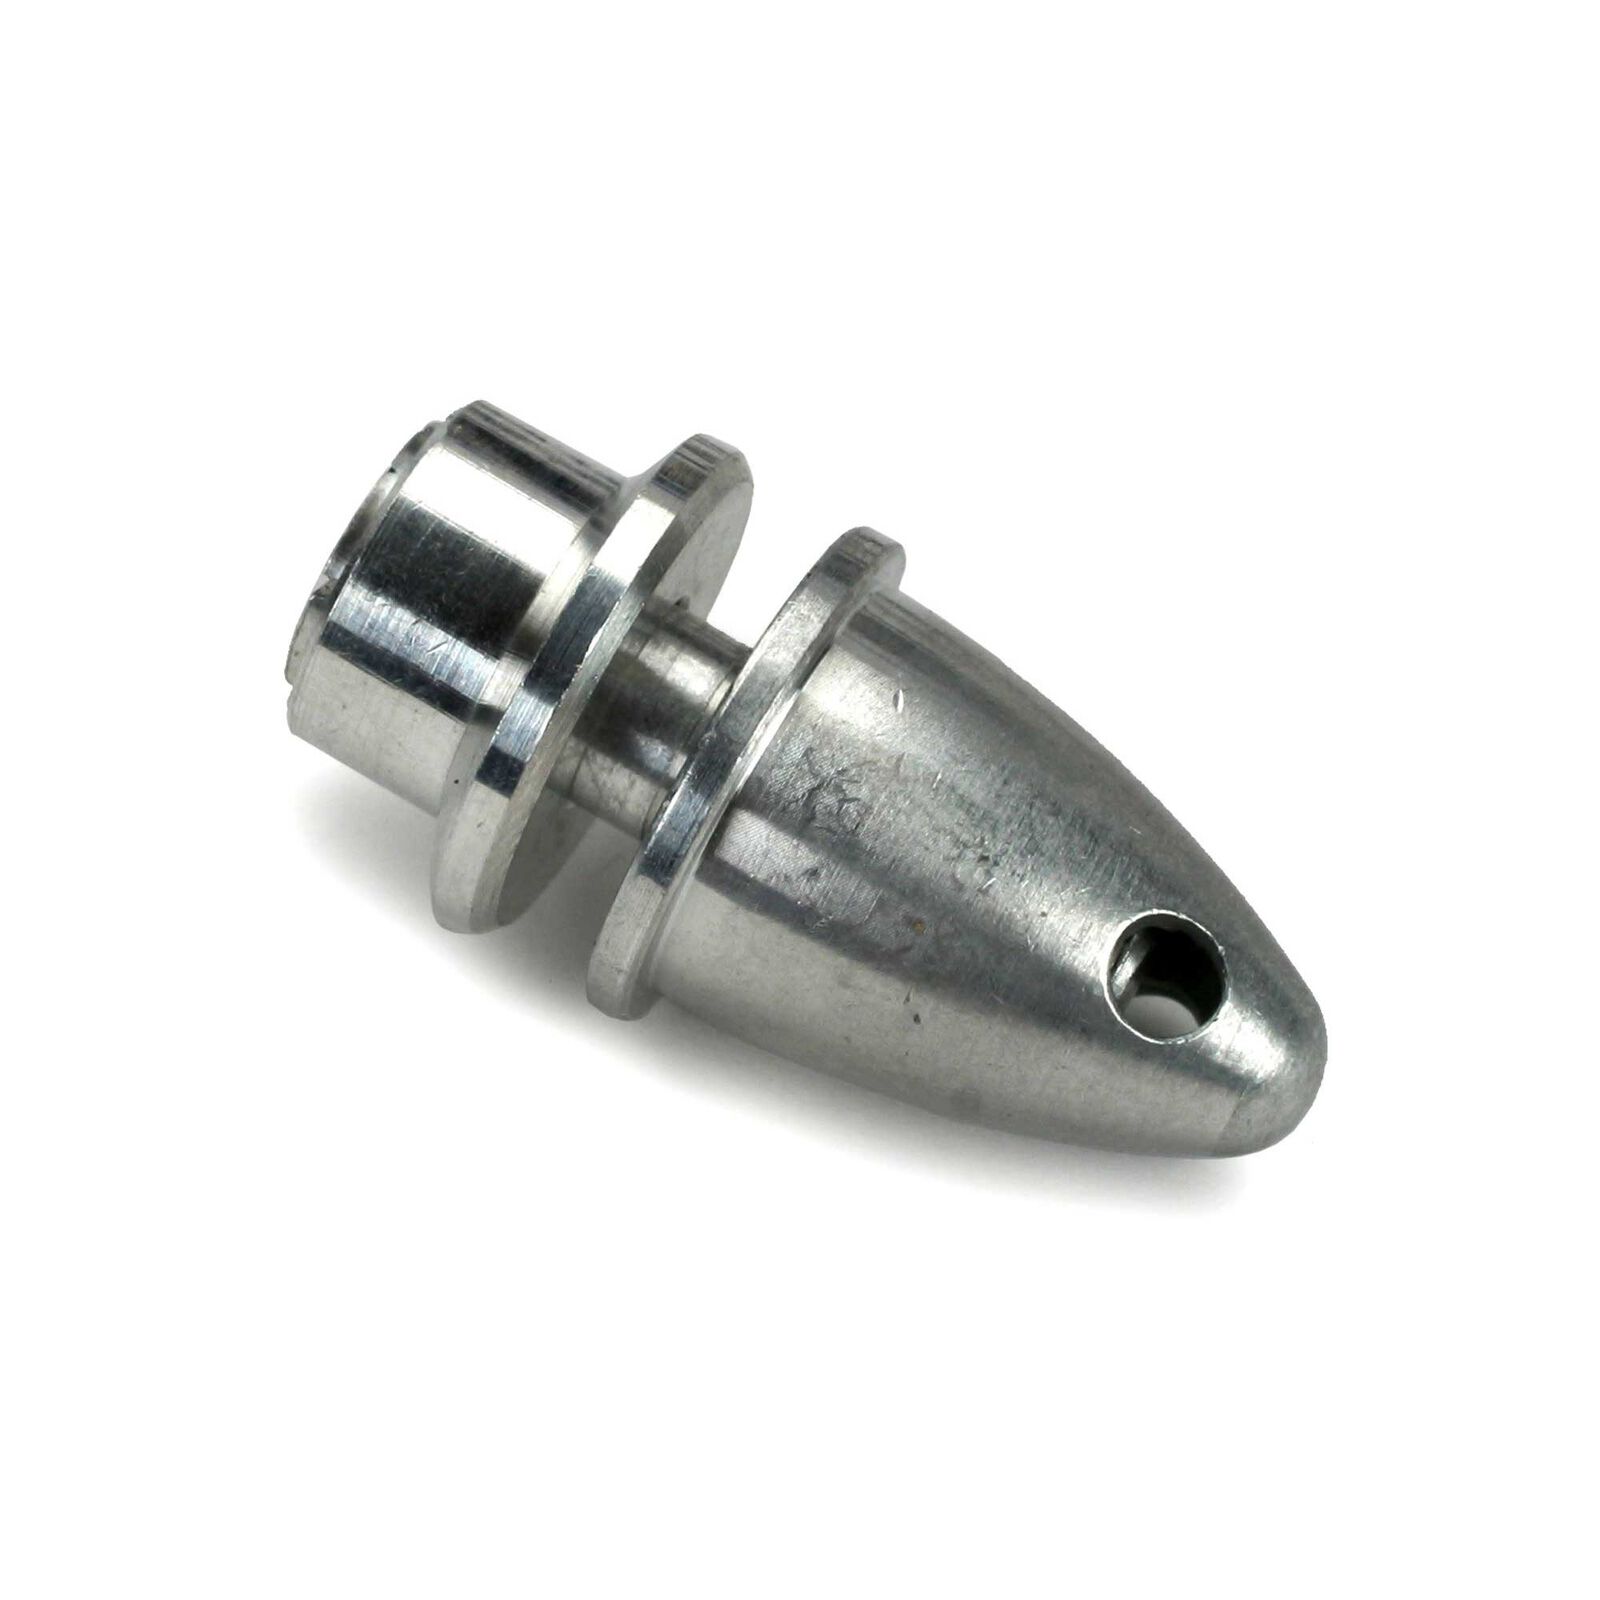 Prop Adapter with Collet, 4mm